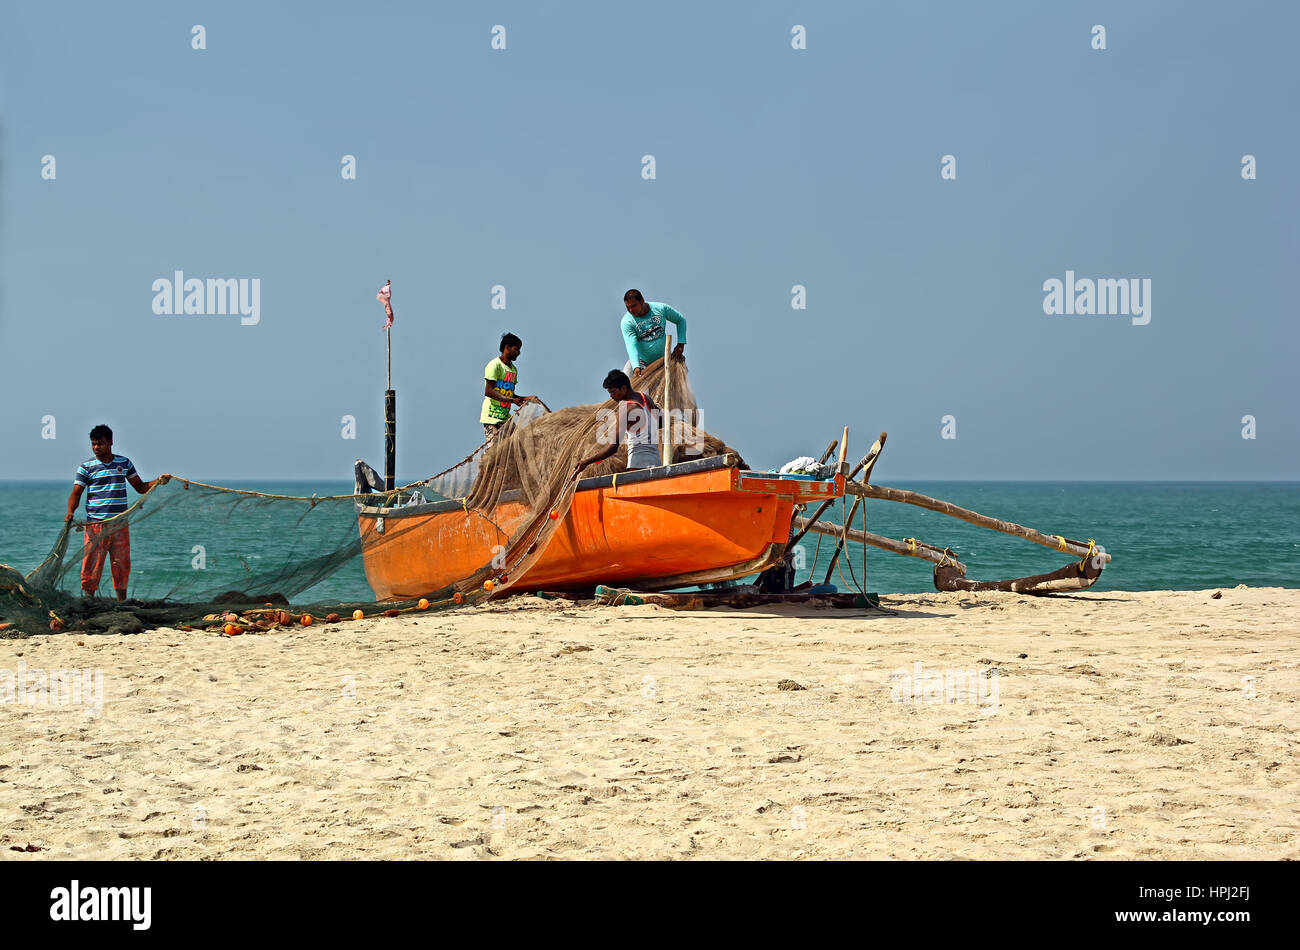 Velsao Beach, Goa, India. Unidentified fishermen systematically load the boat with large net in preparation of fishing trip to the deep sea Stock Photo